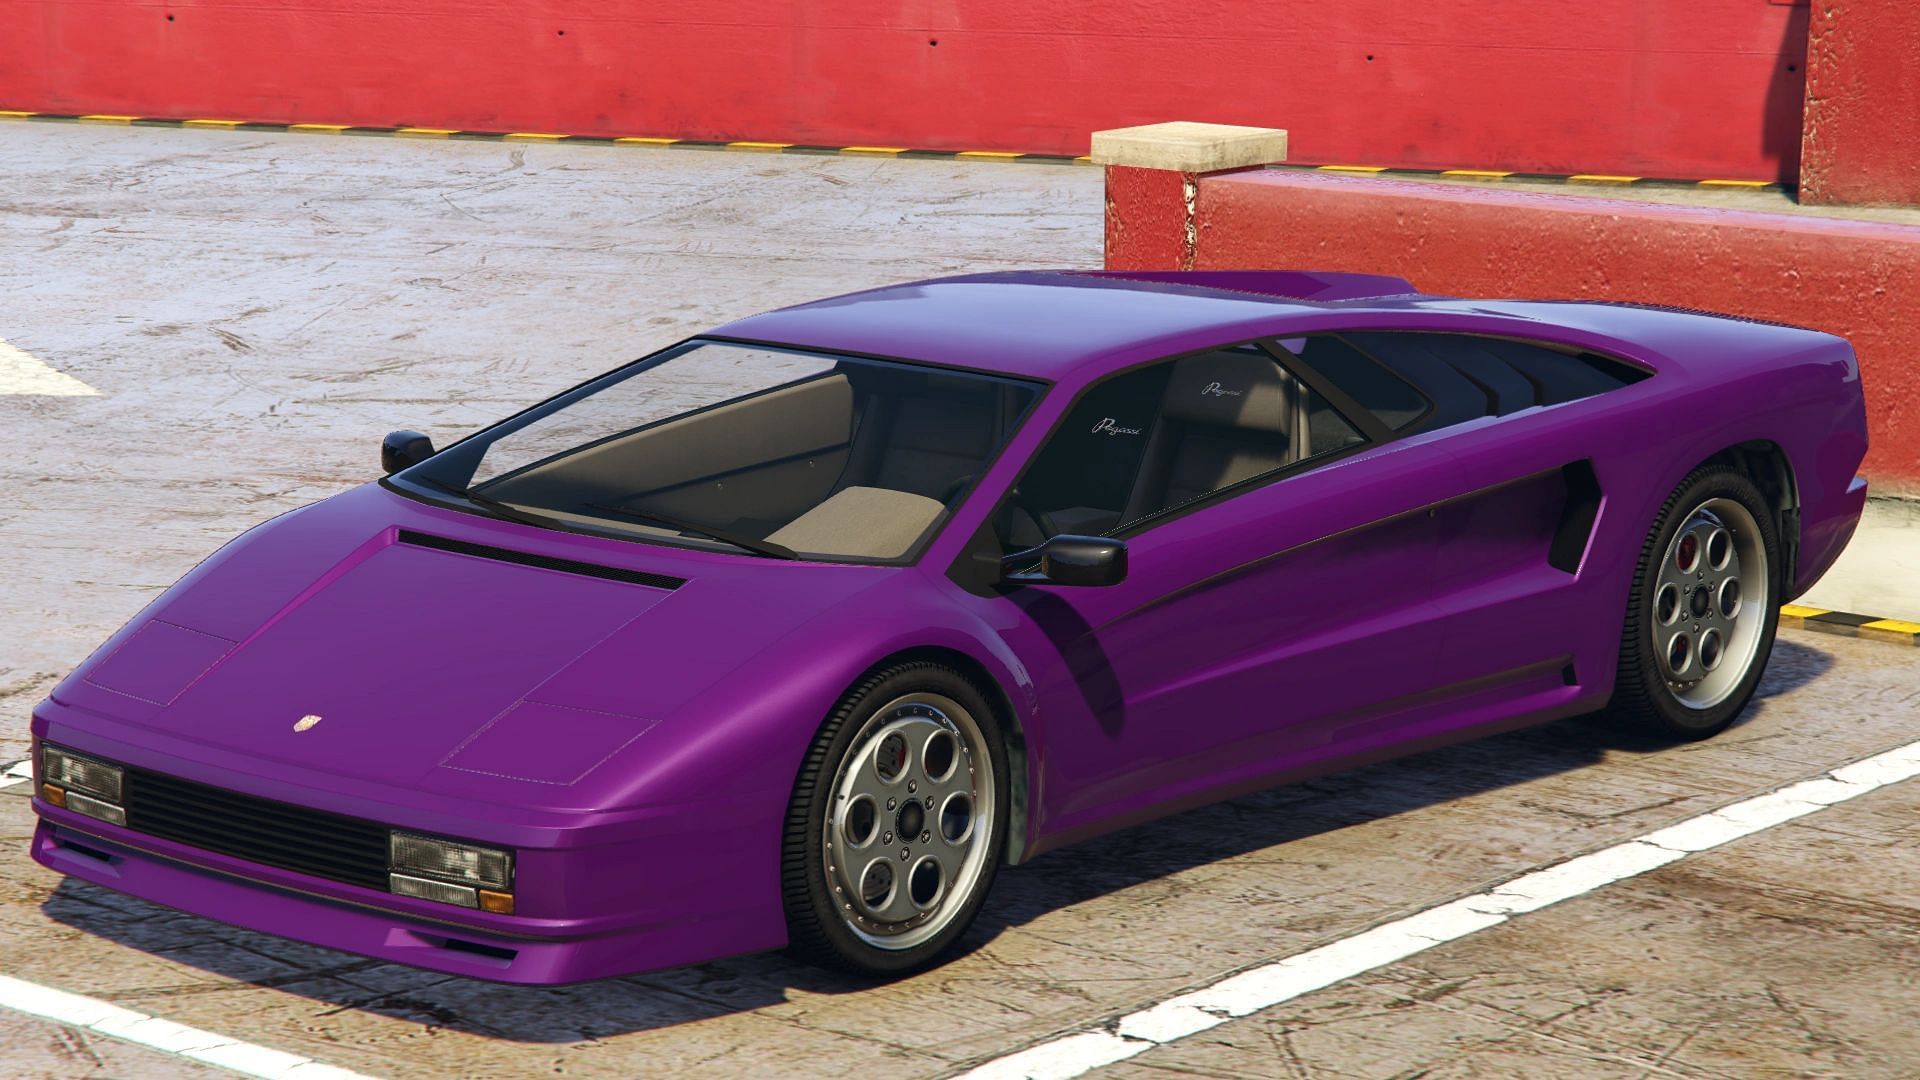 The Infernus Classic is an iconic car that should become free (Image via Rockstar Games || GTA Wiki)